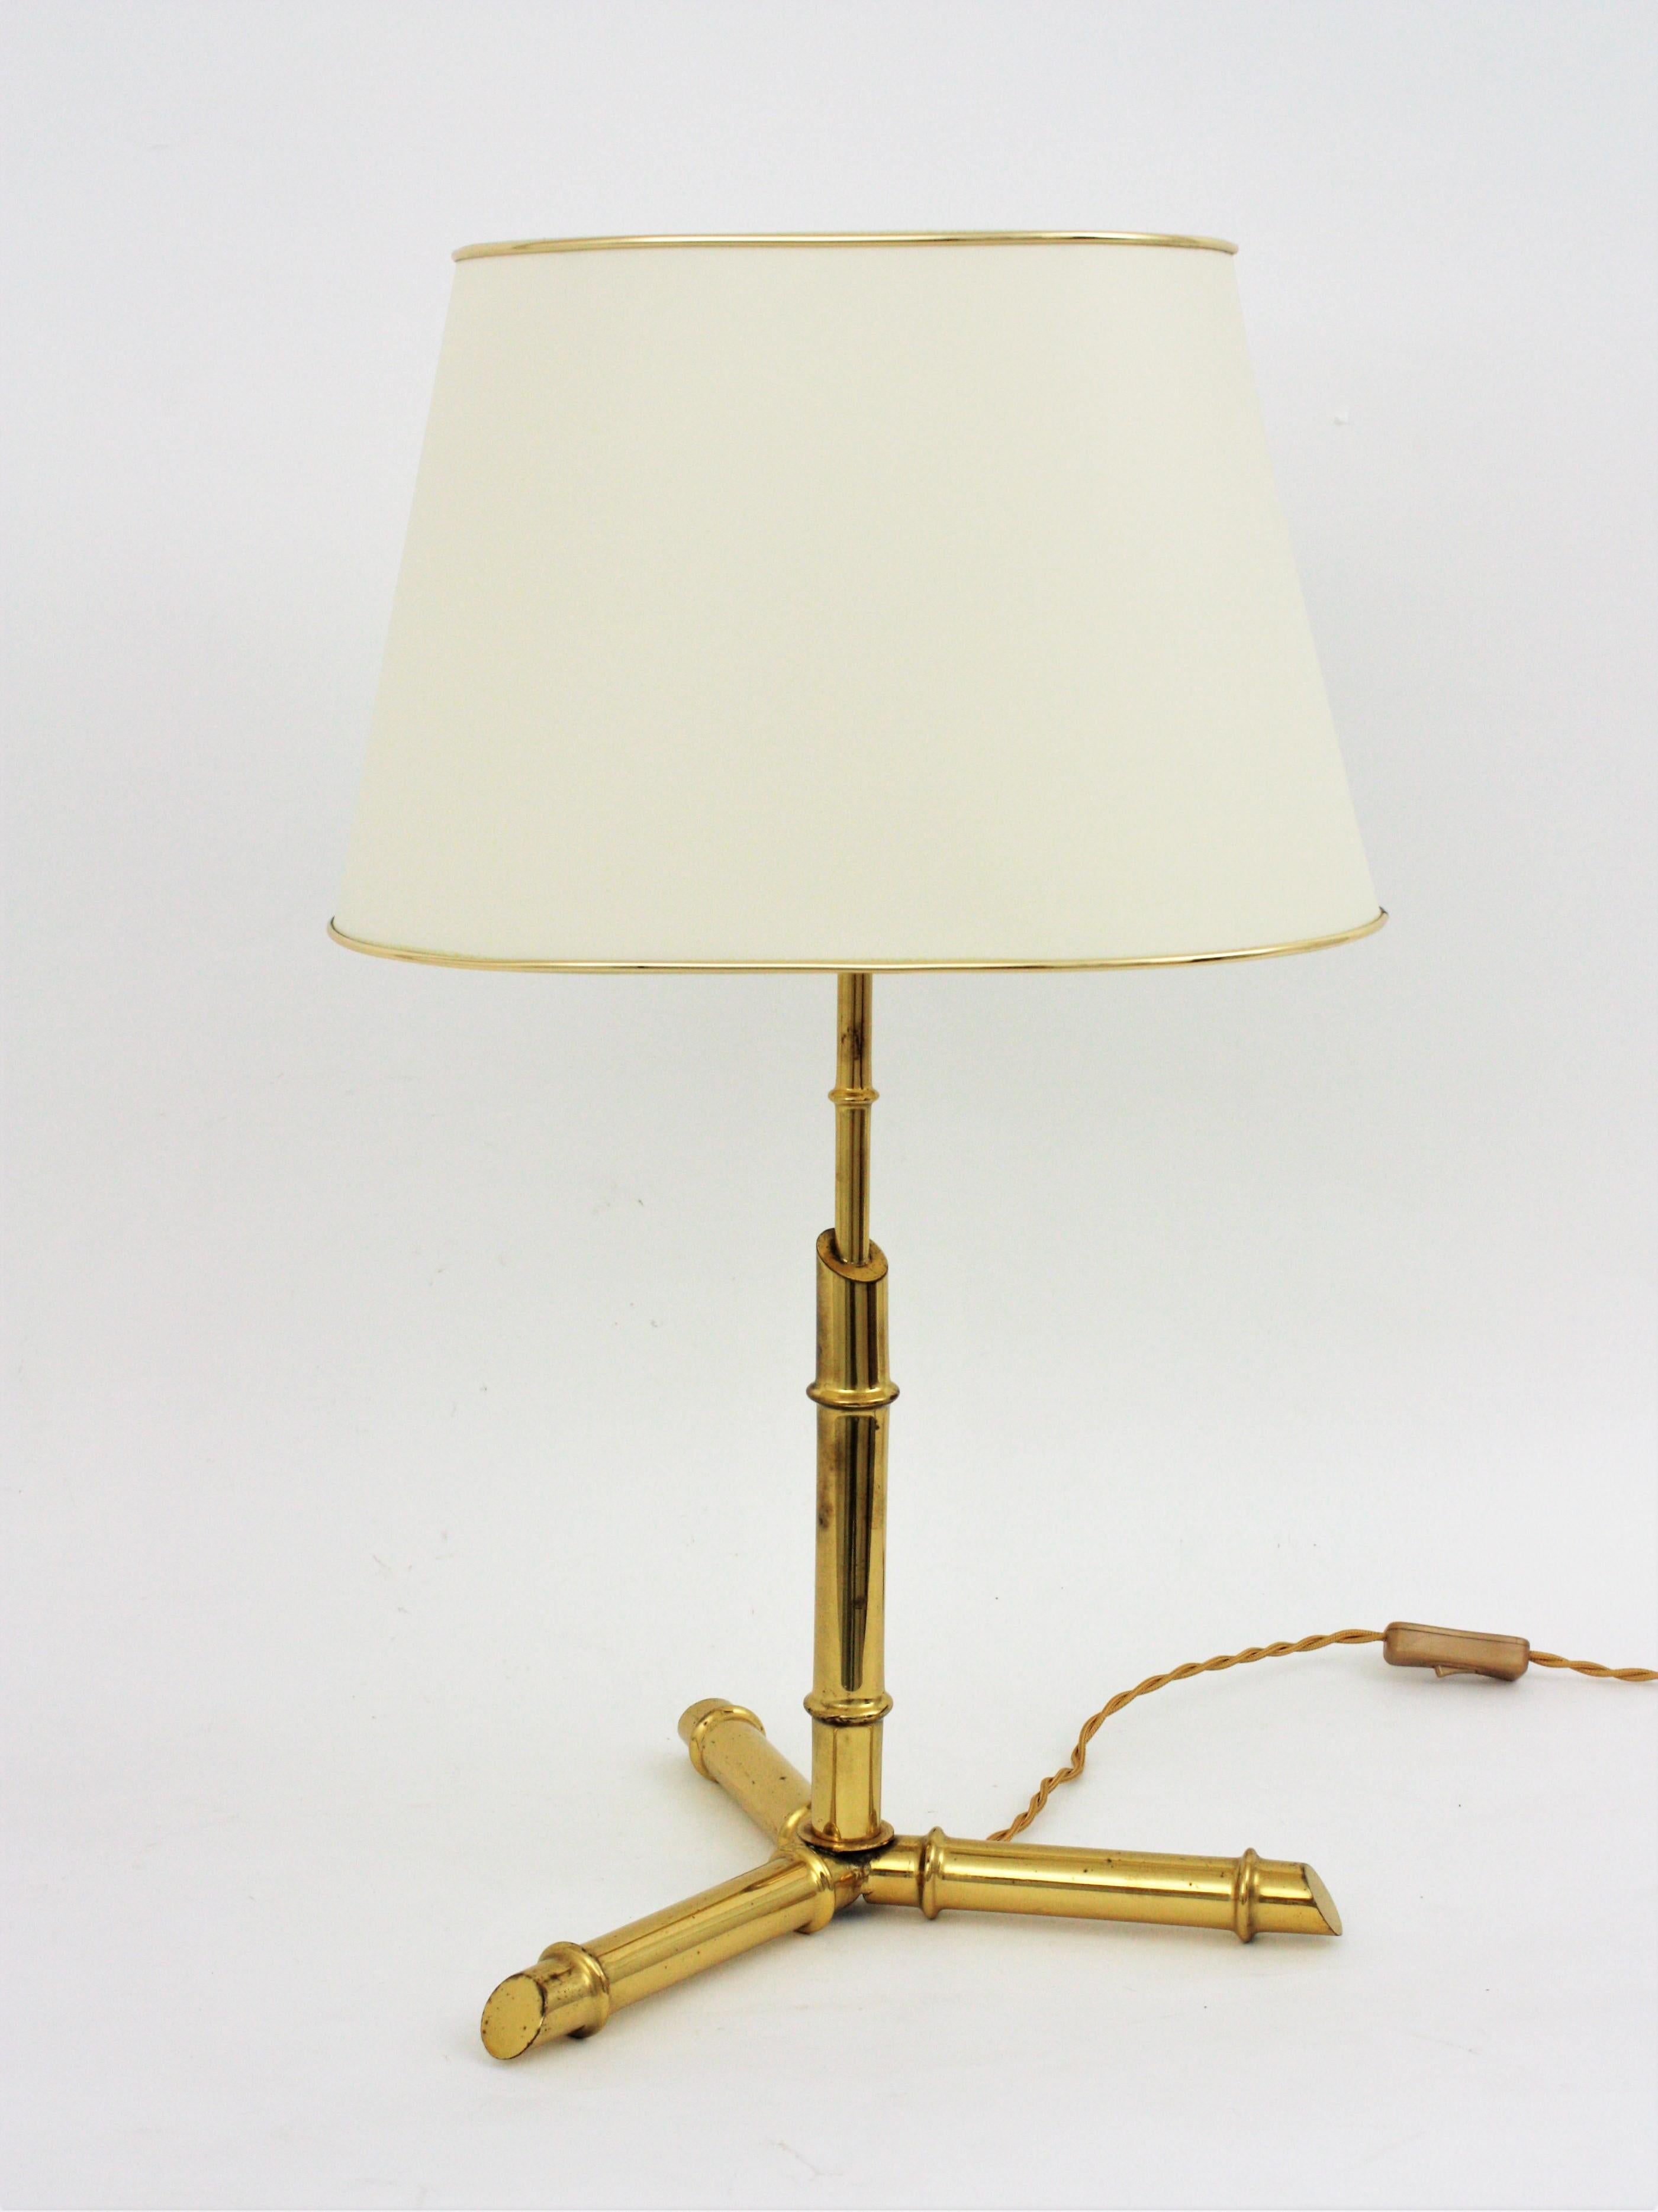 Italian Faux Bamboo Tripod Table Lamp in Brass, 1970s For Sale 2